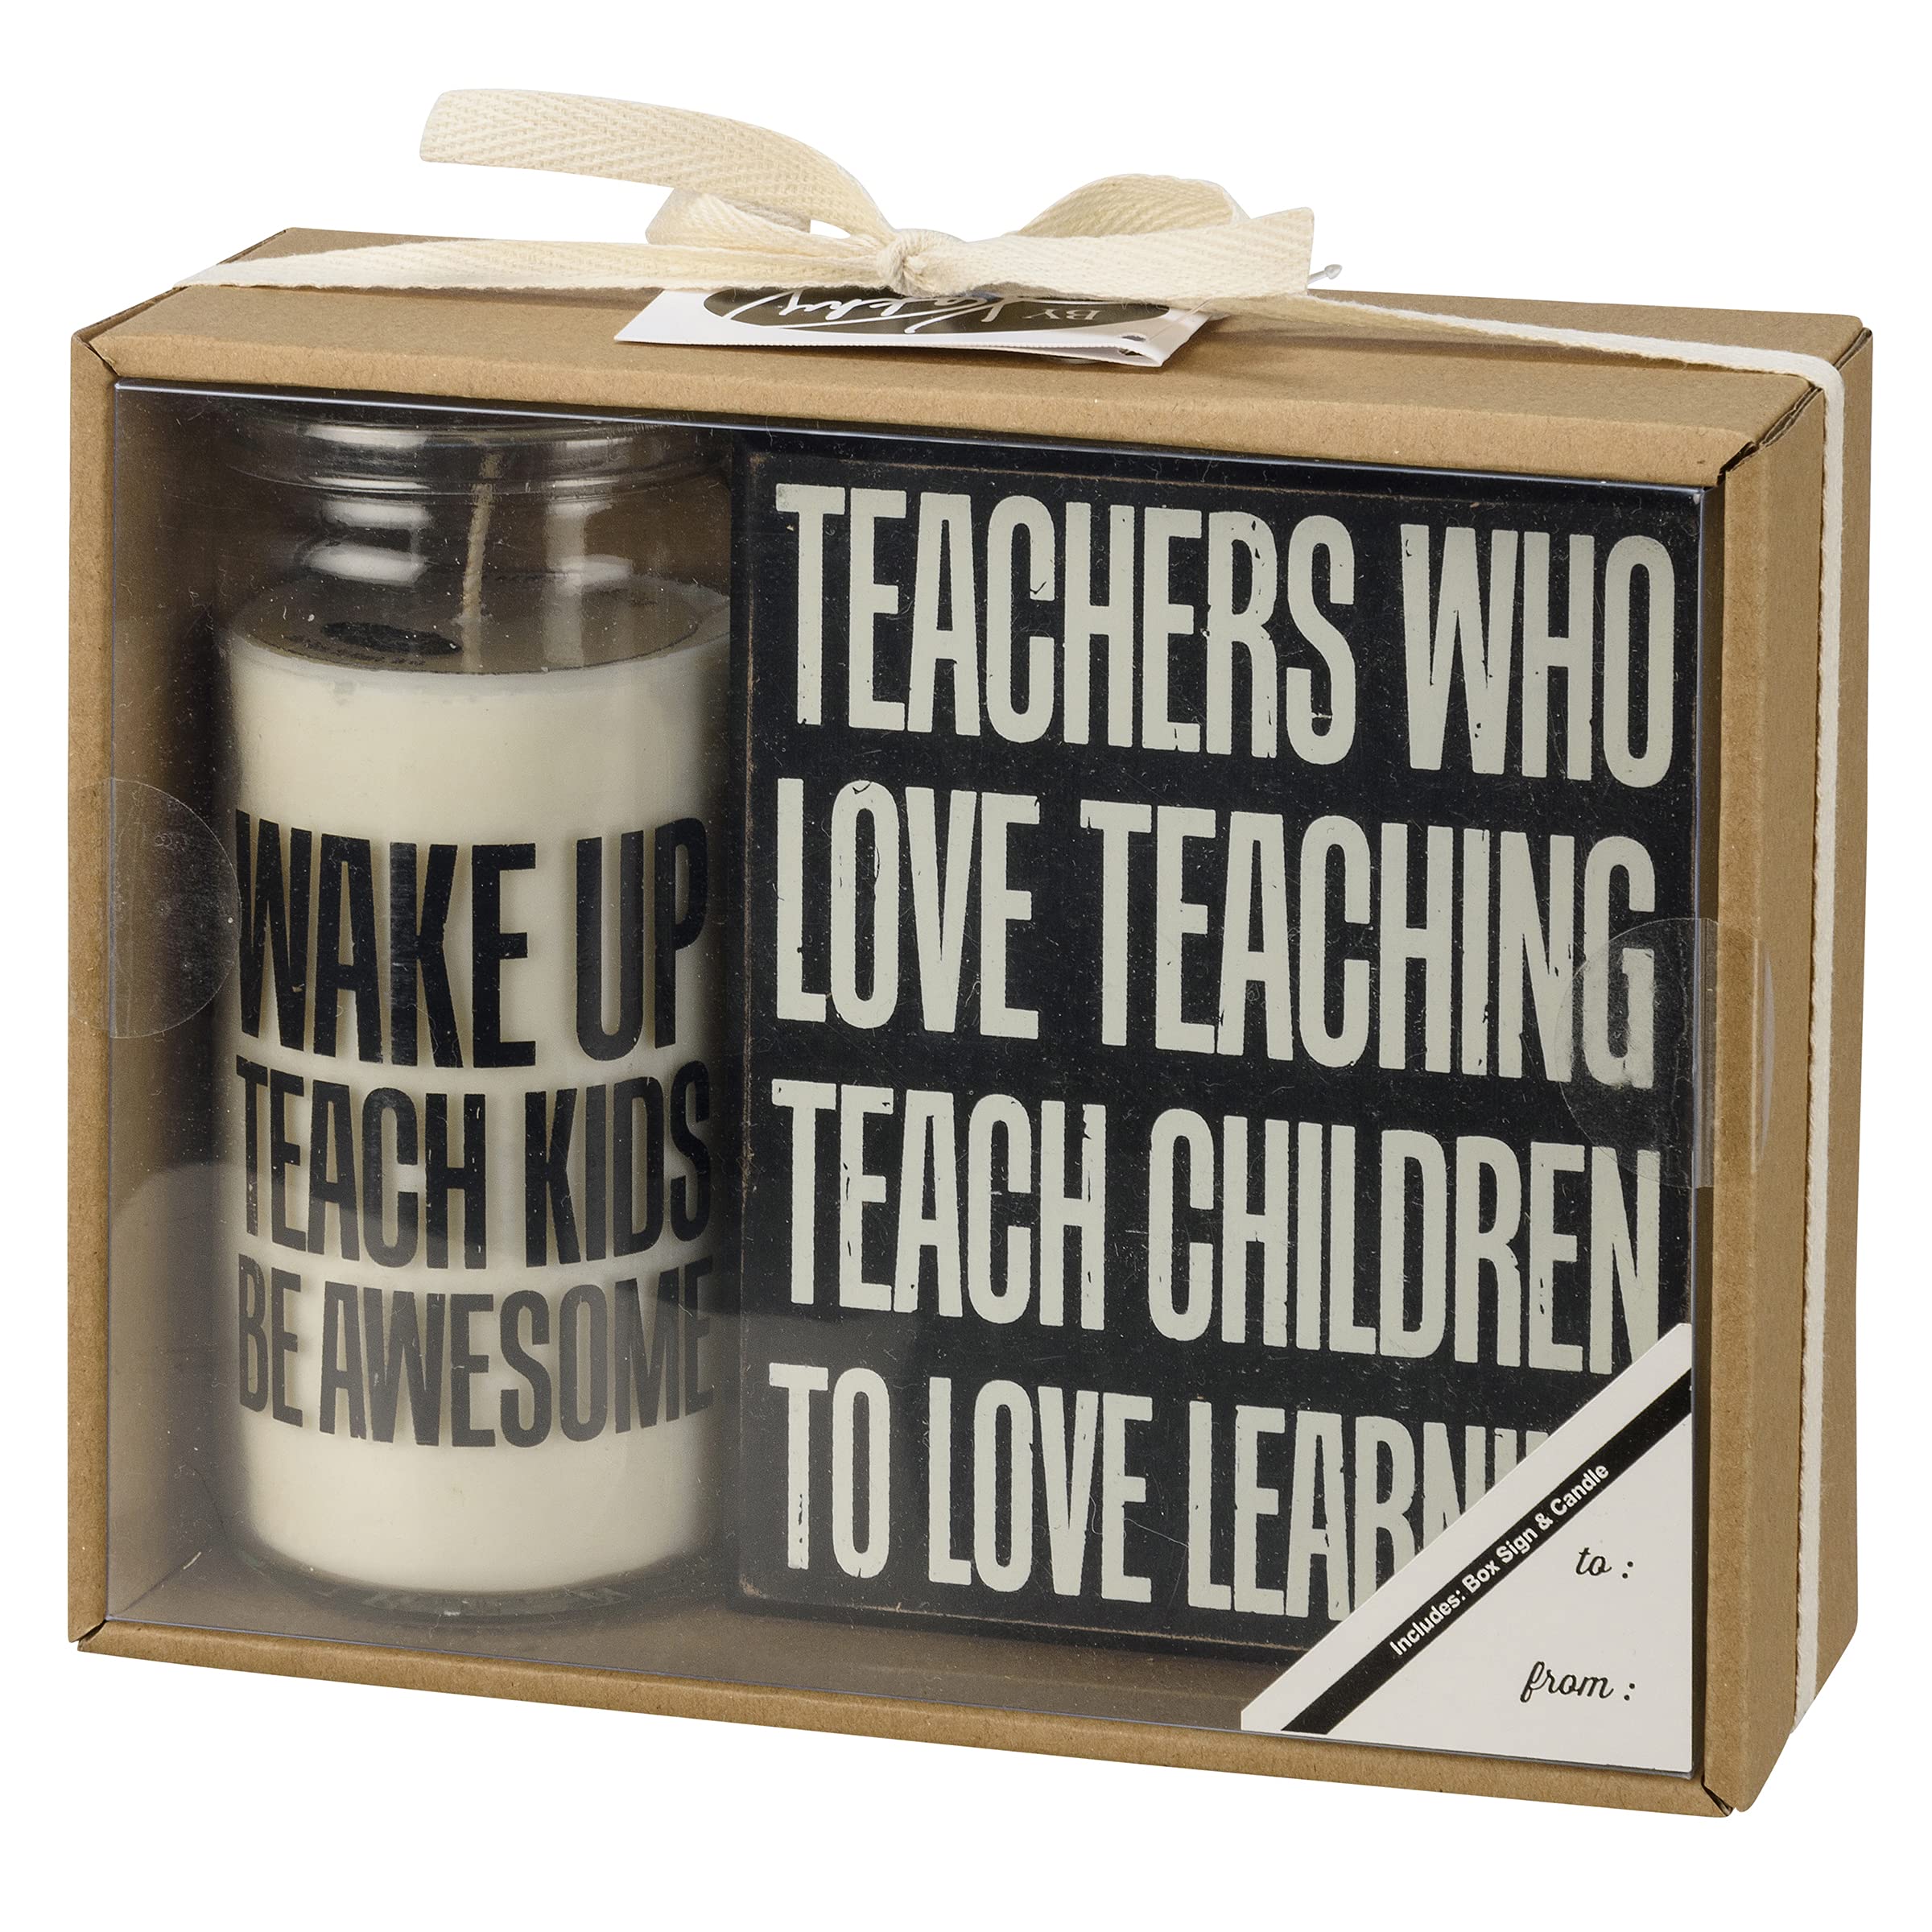 Primitives by Kathy Wake Up Teach Kids Be Awesome; Teachers Who Love Teaching Teach Children to Love Learning Home Décor Gift Set